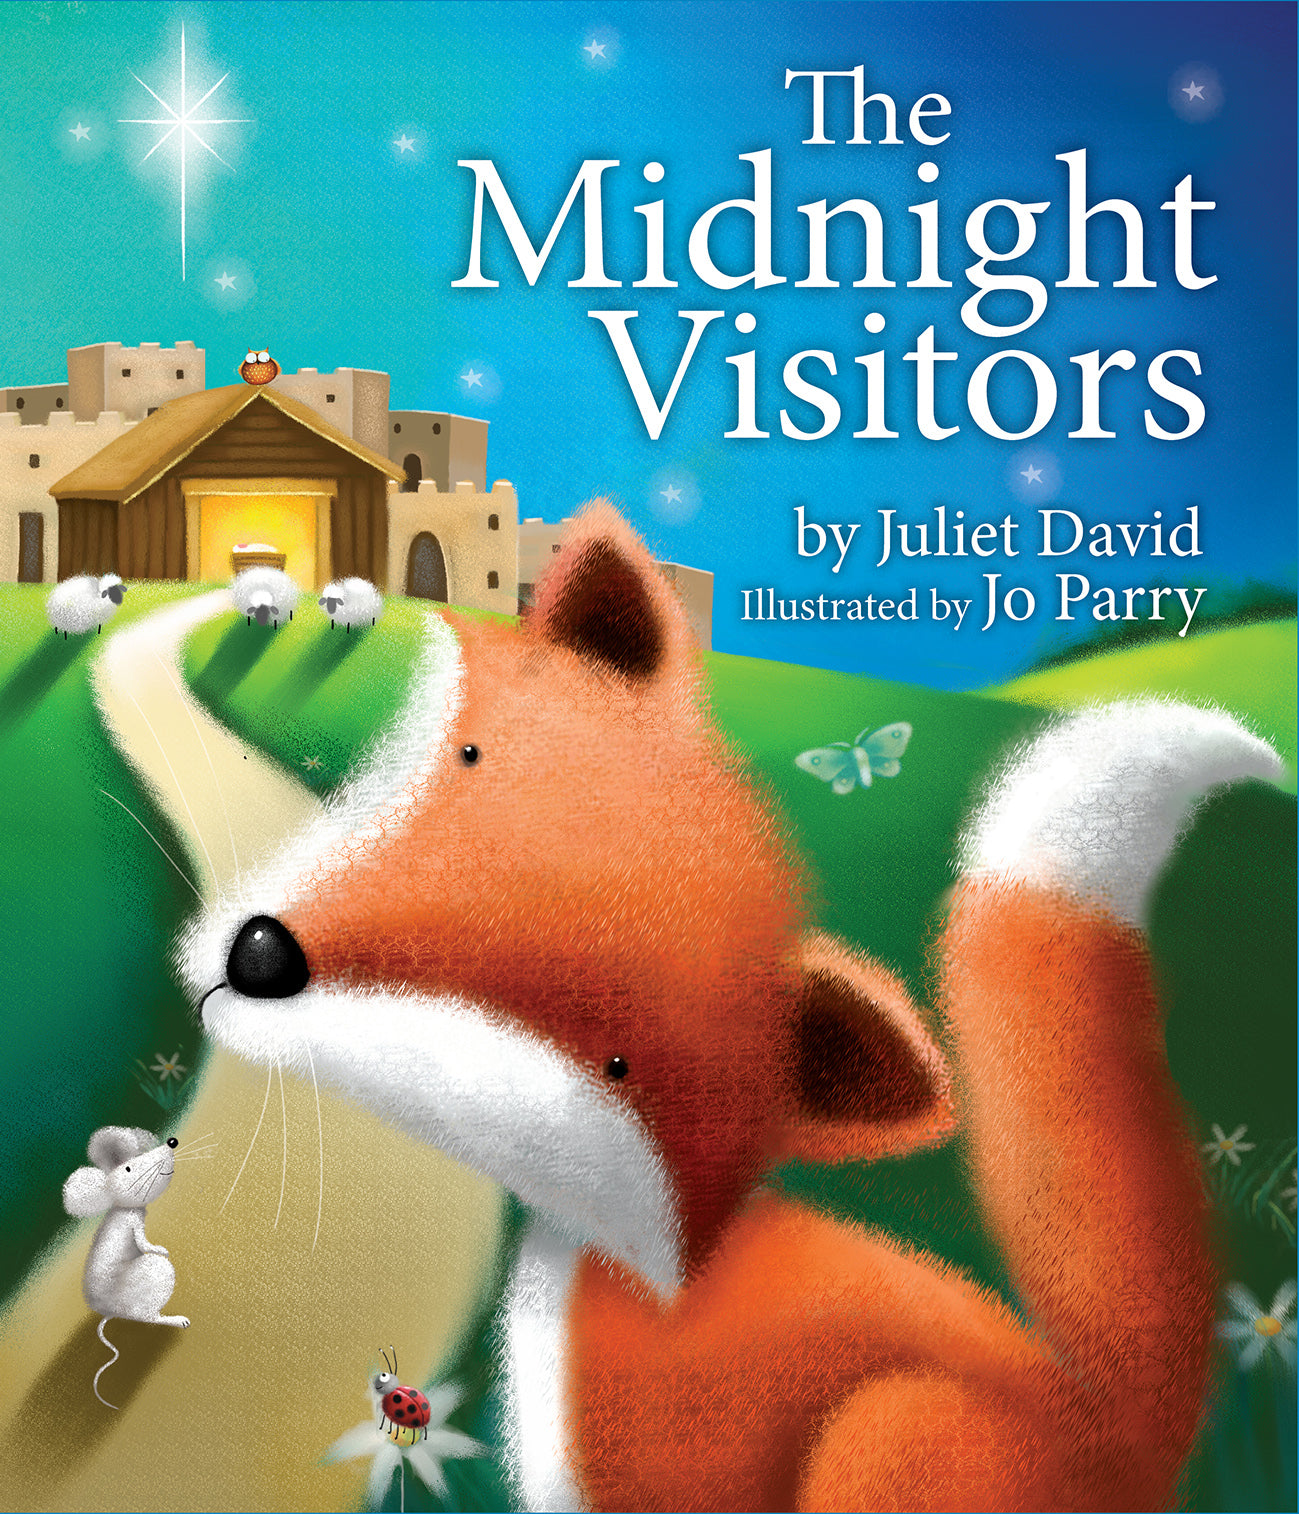 Image of The Midnight Visitors other